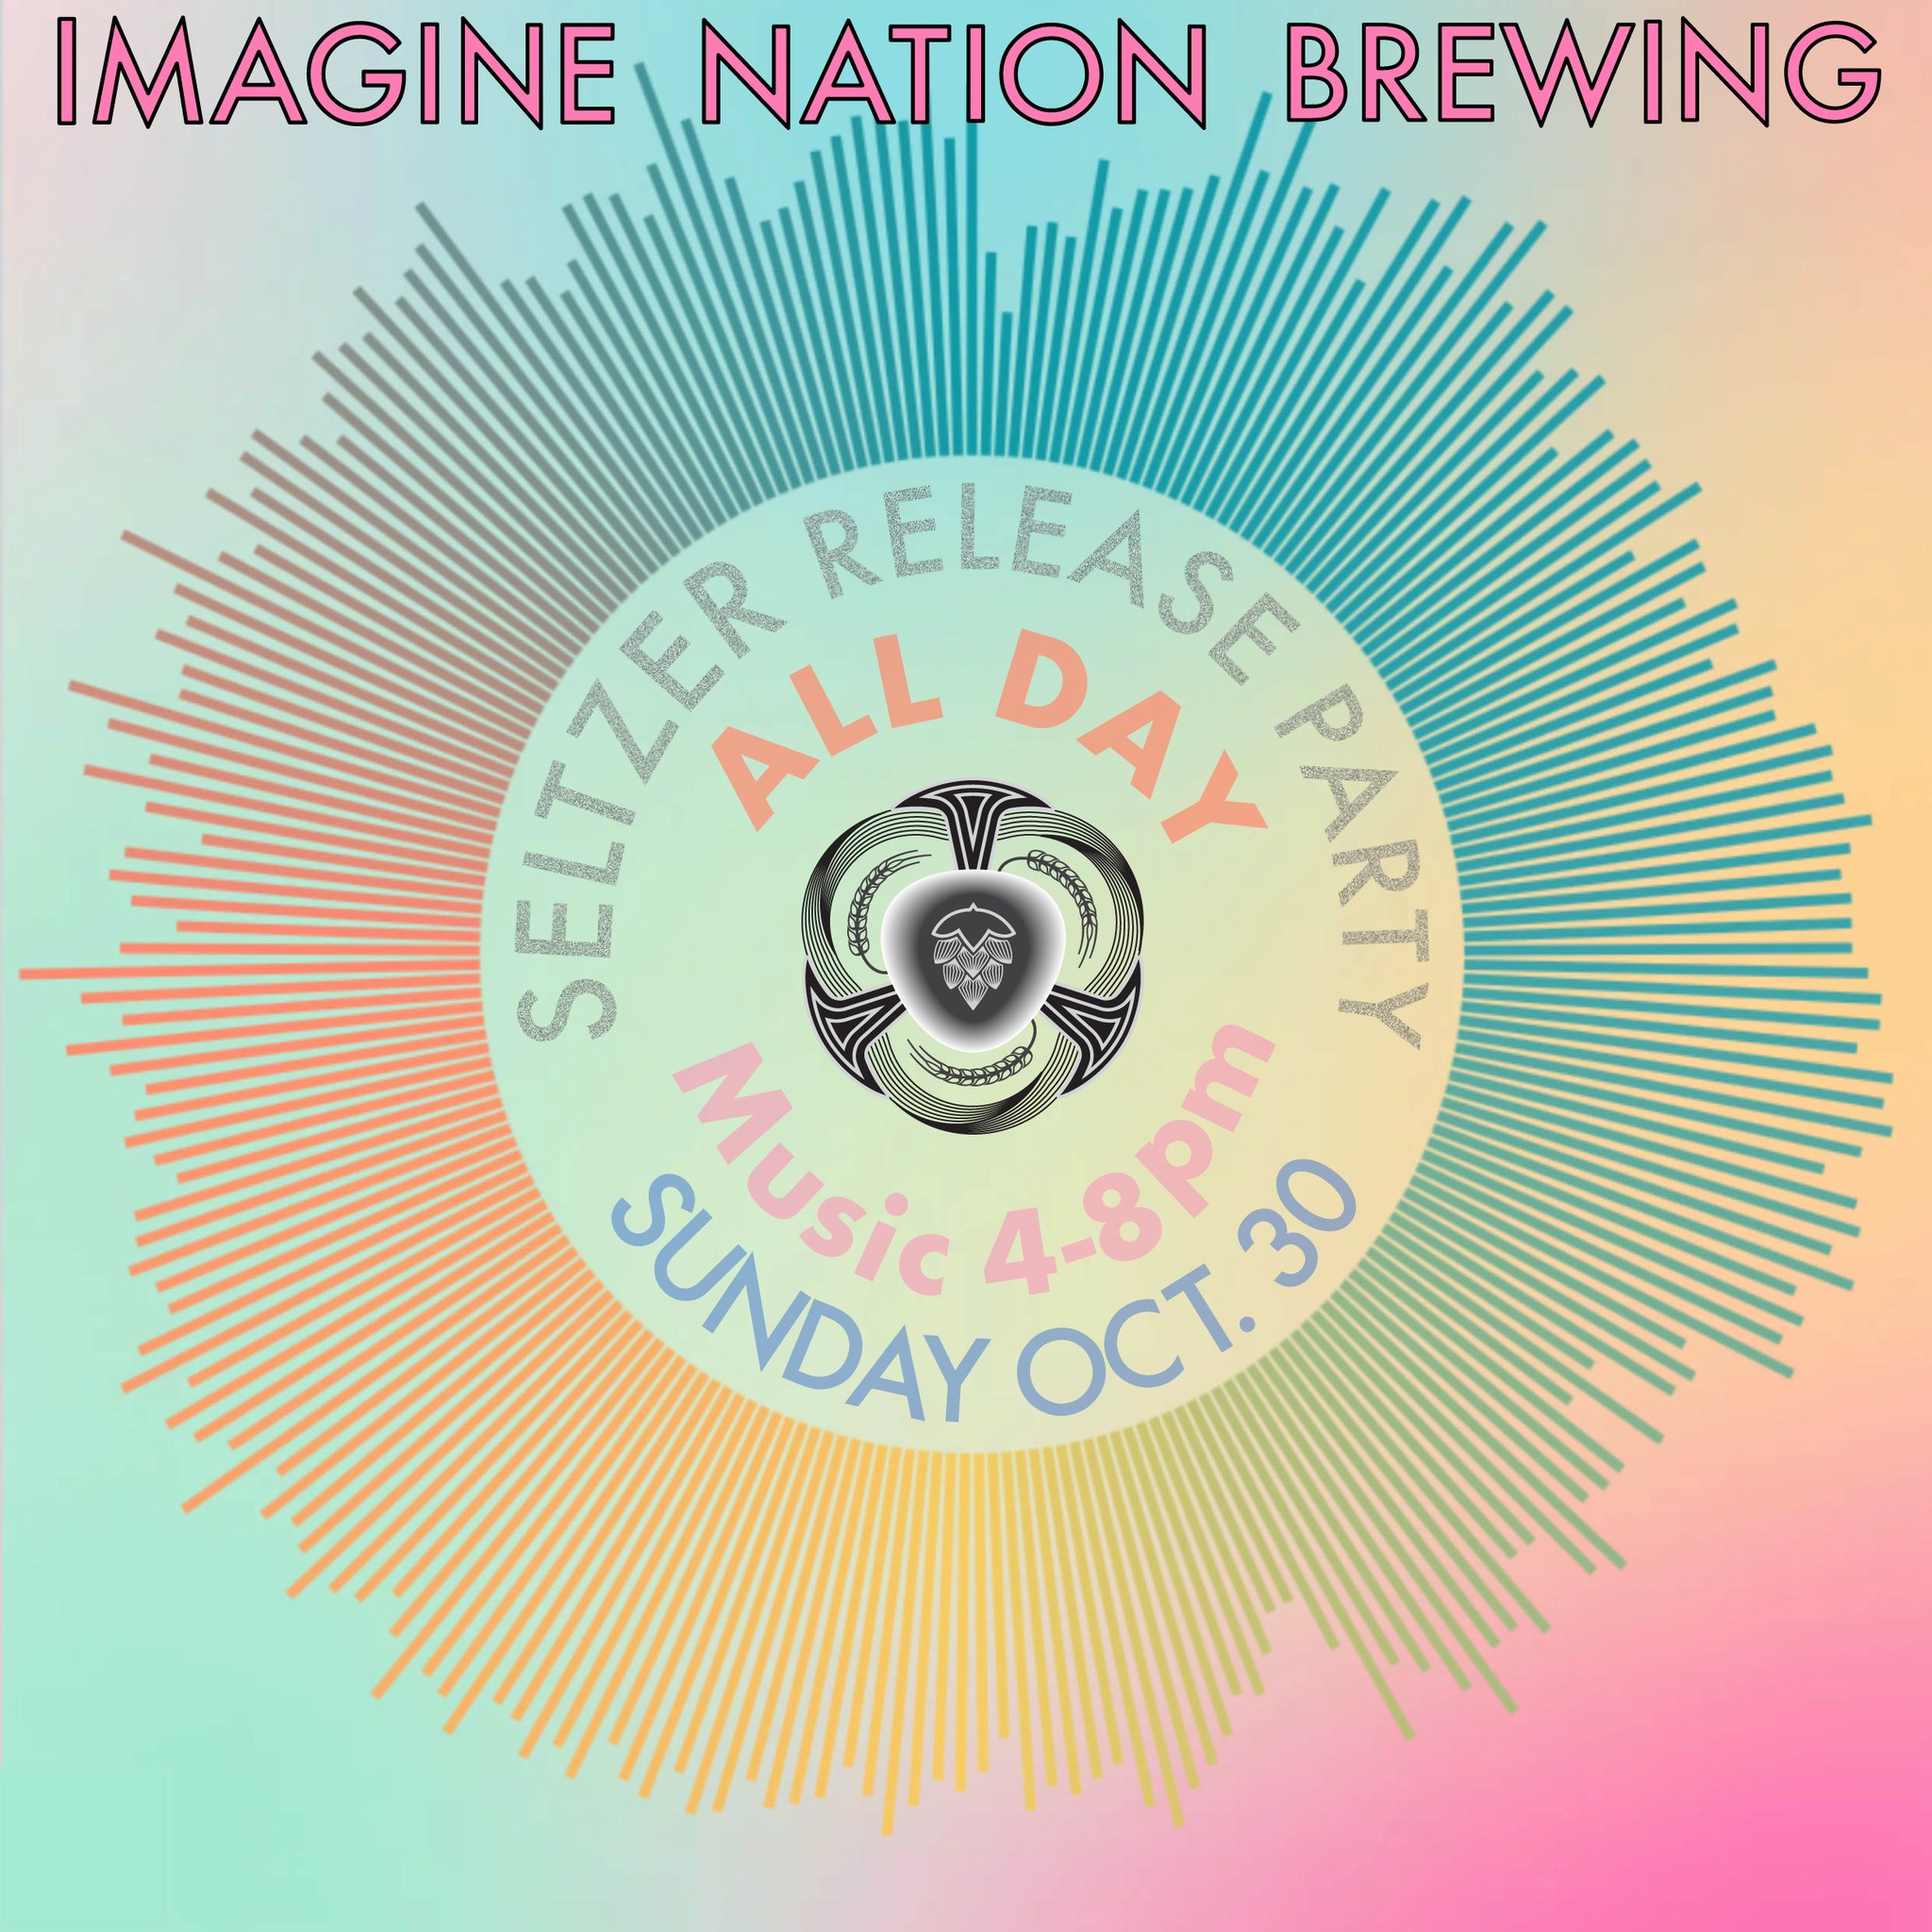 Cymatic Hard Seltzer Release Party at Imagine Nation Brewing in Missoula